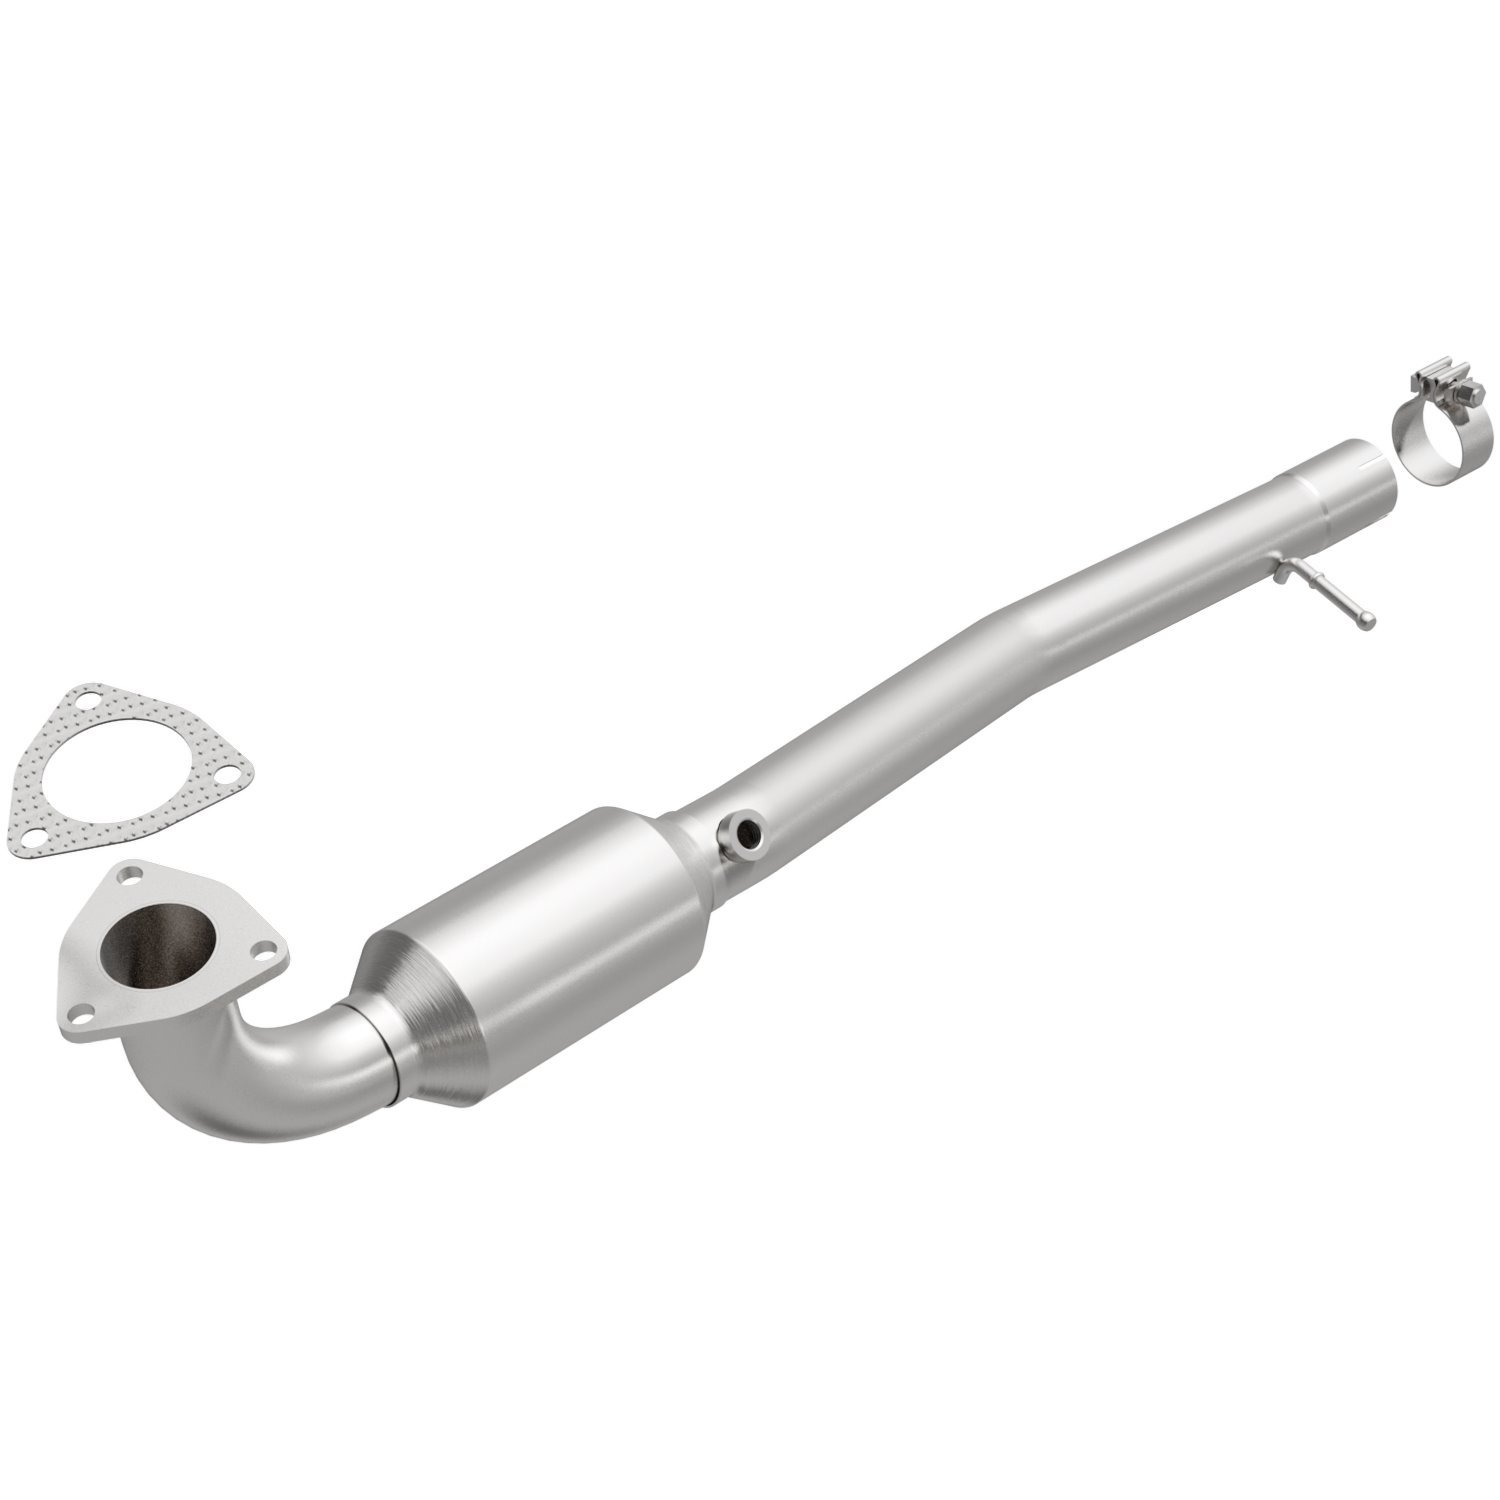 2010-2012 Land Rover Range Rover OEM Grade Federal / EPA Compliant Direct-Fit Catalytic Converter